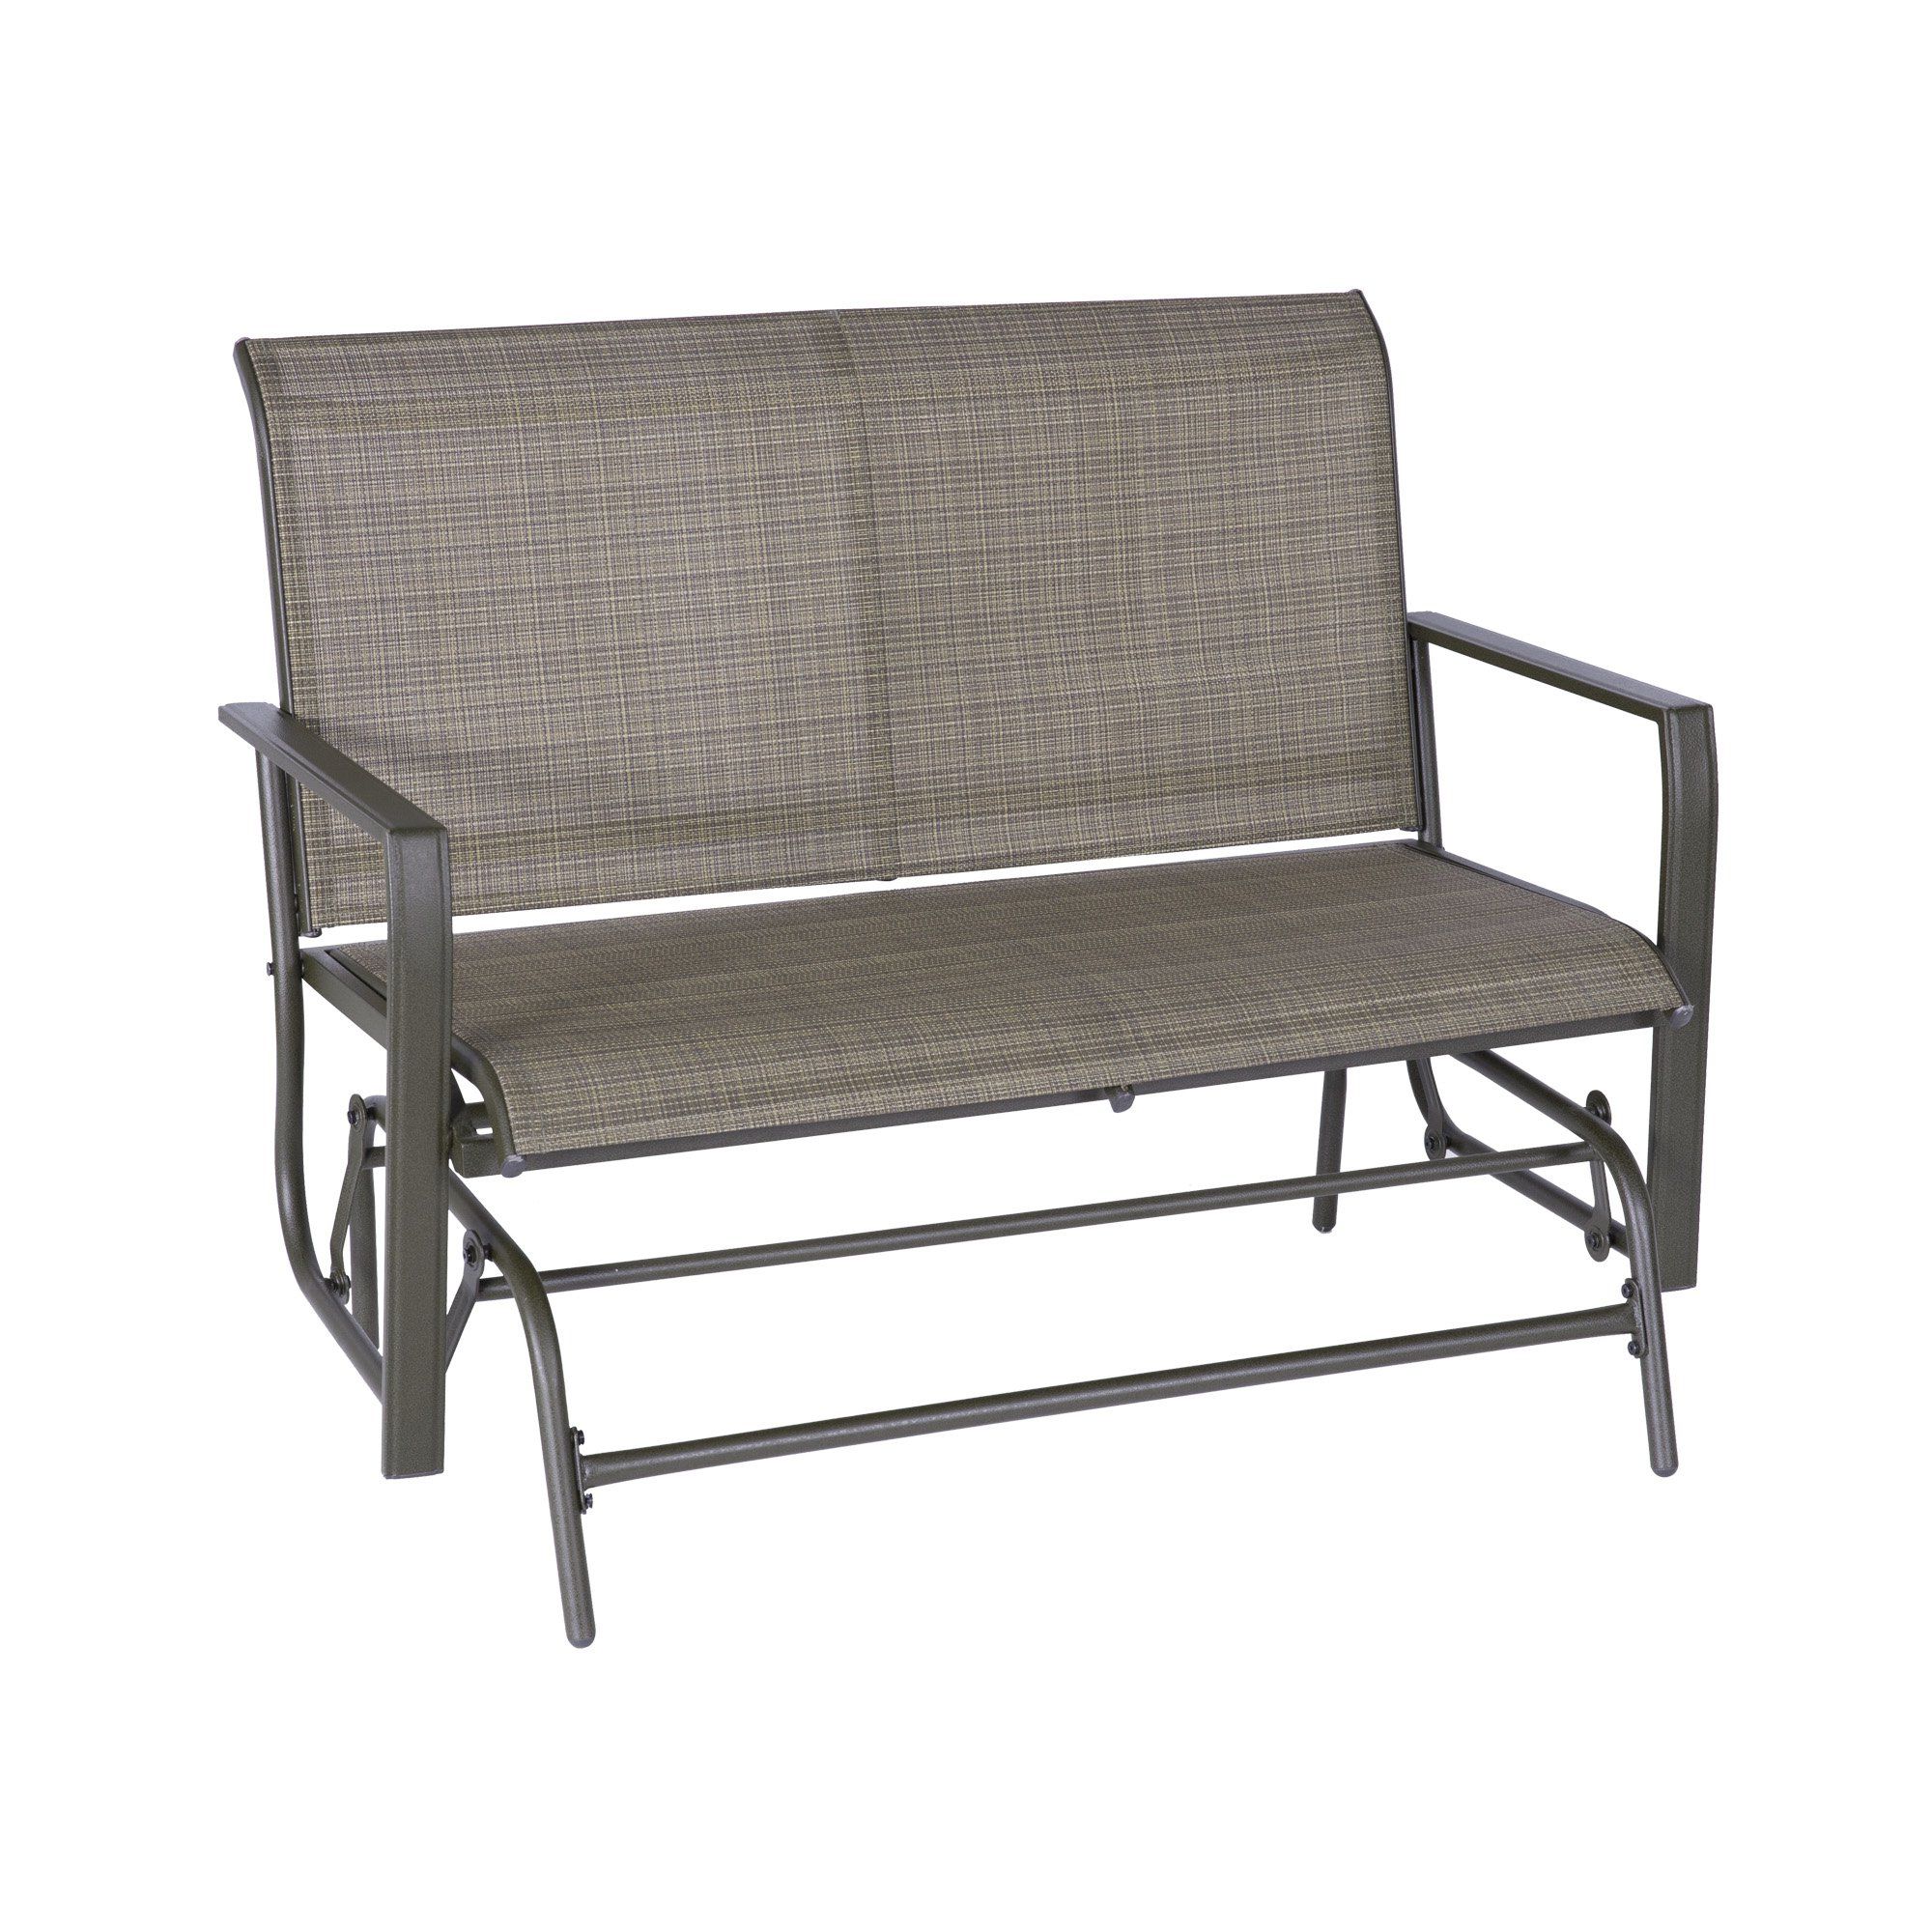 2019 Outdoor Patio Swing Glider Benches With Regard To Buy Outdoor Patio Leisure Swing Rocker Glider Bench Loveseat (View 19 of 30)